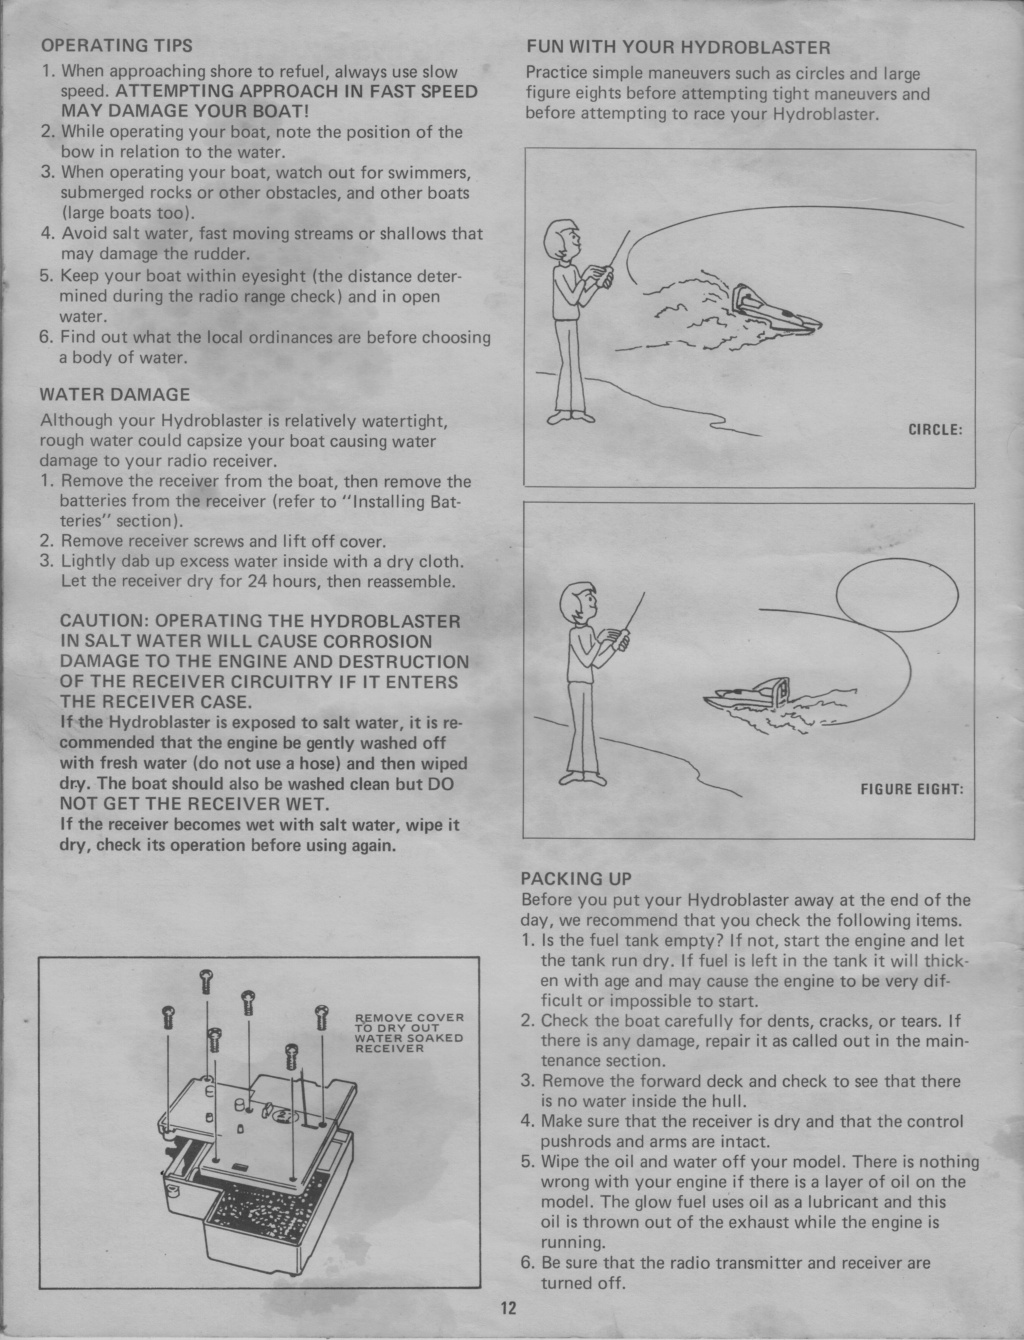 Hydro Blaster pictures and manual scans . Hydro_19